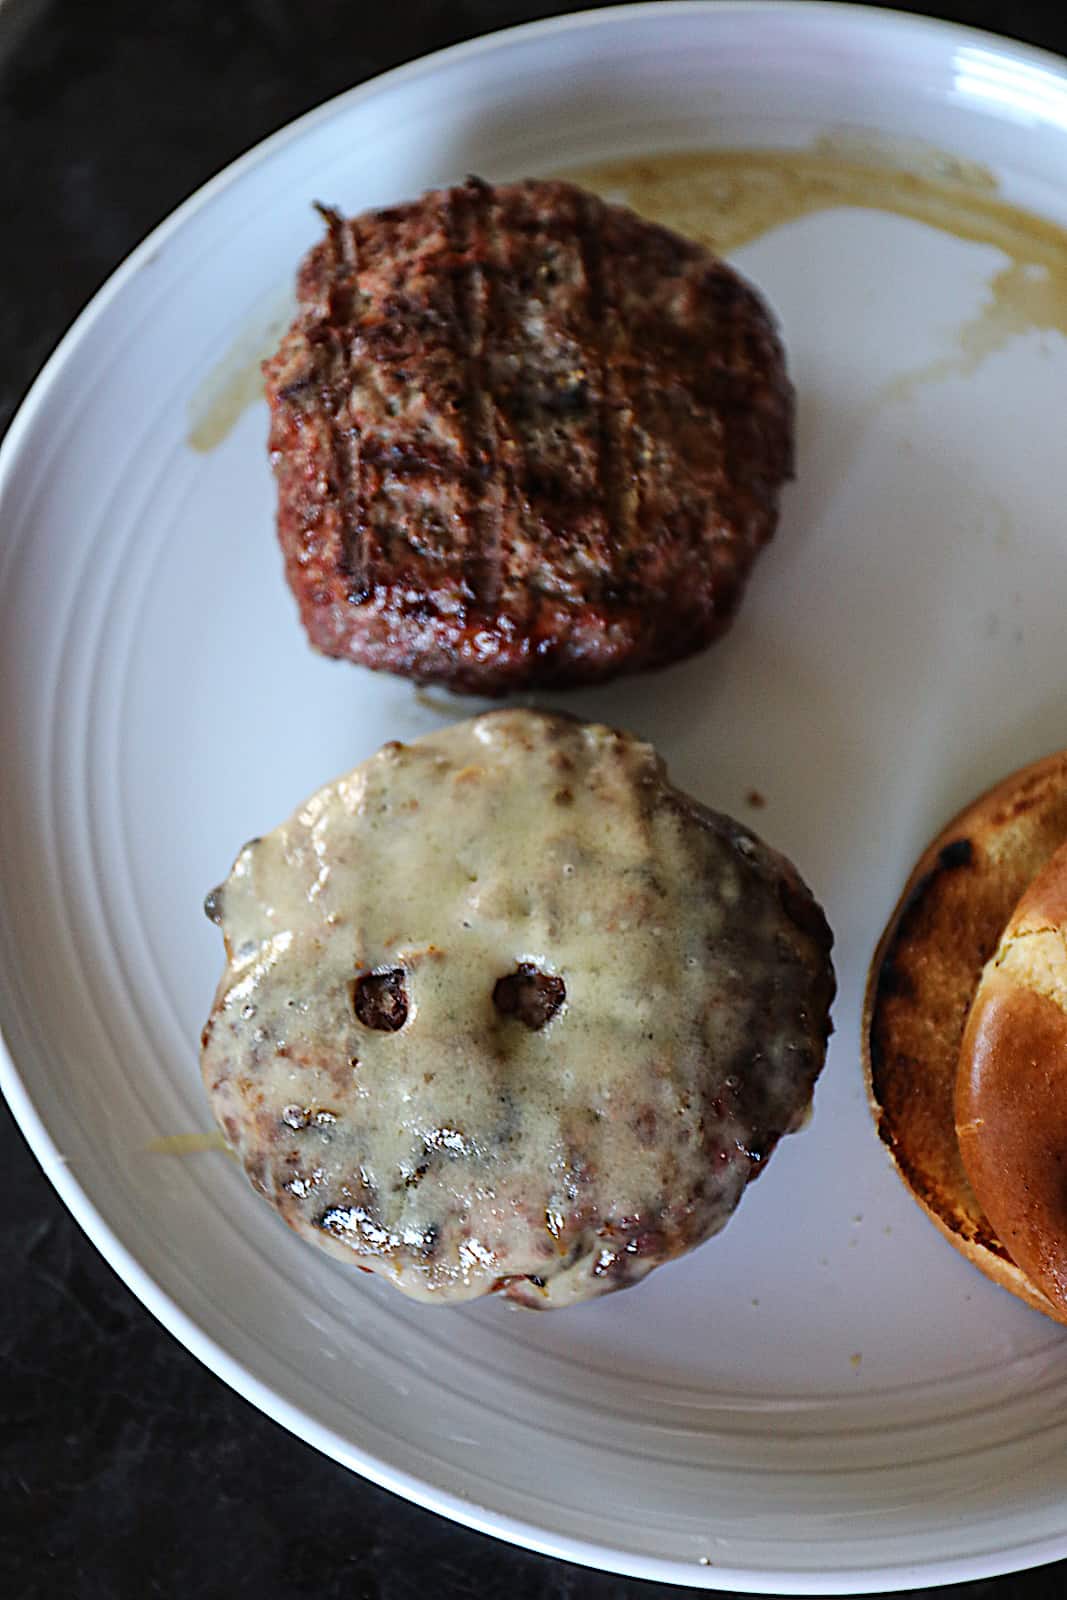 ½ lb burgers grilled for 10 minutes to medium with cheese on top